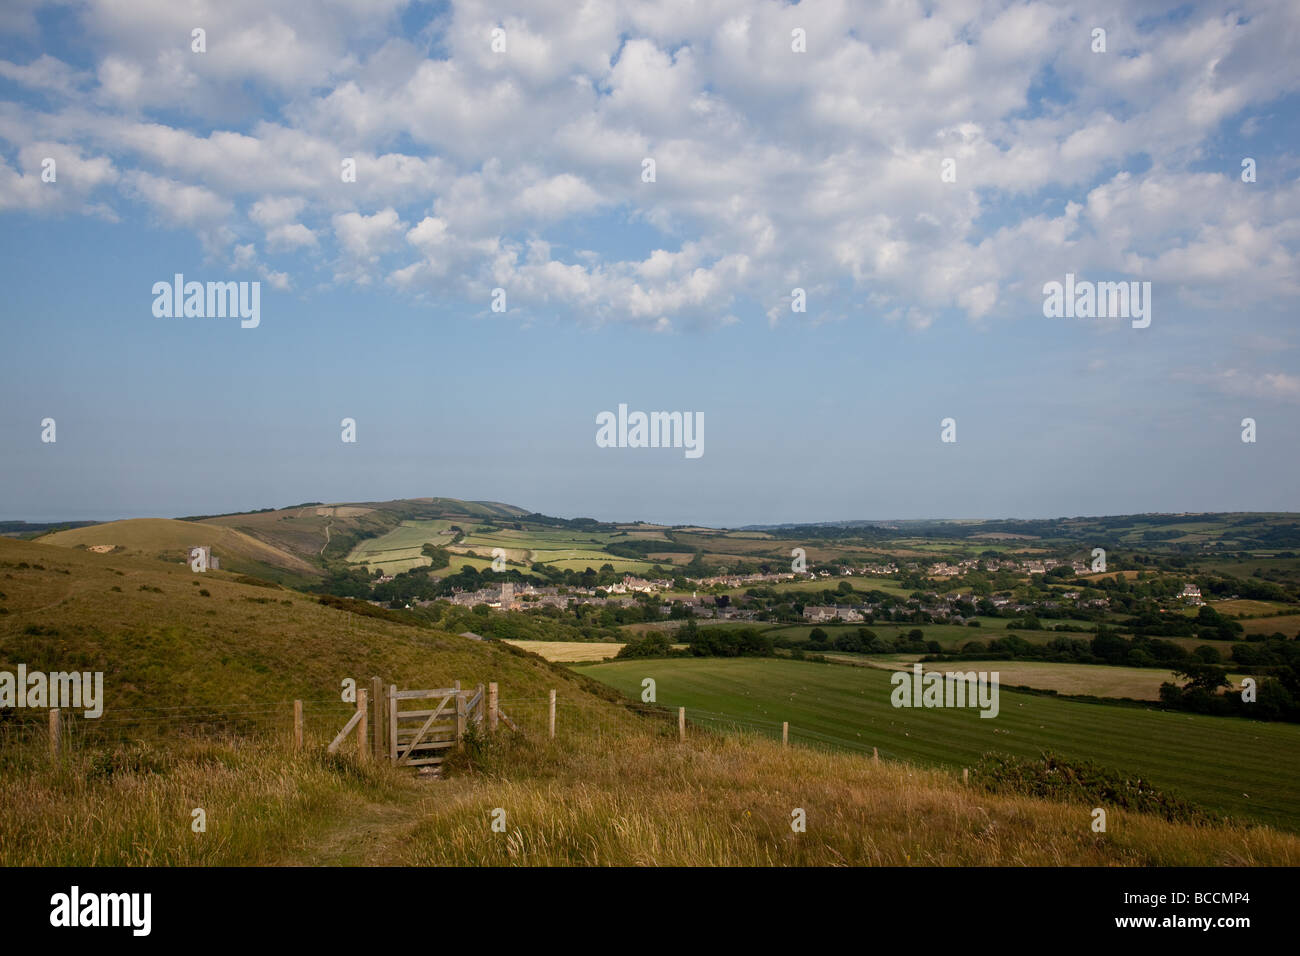 Looking towards Corfe Castle ruins and village as seen from the footpath on the Purbeck Hills, Dorset, England Stock Photo